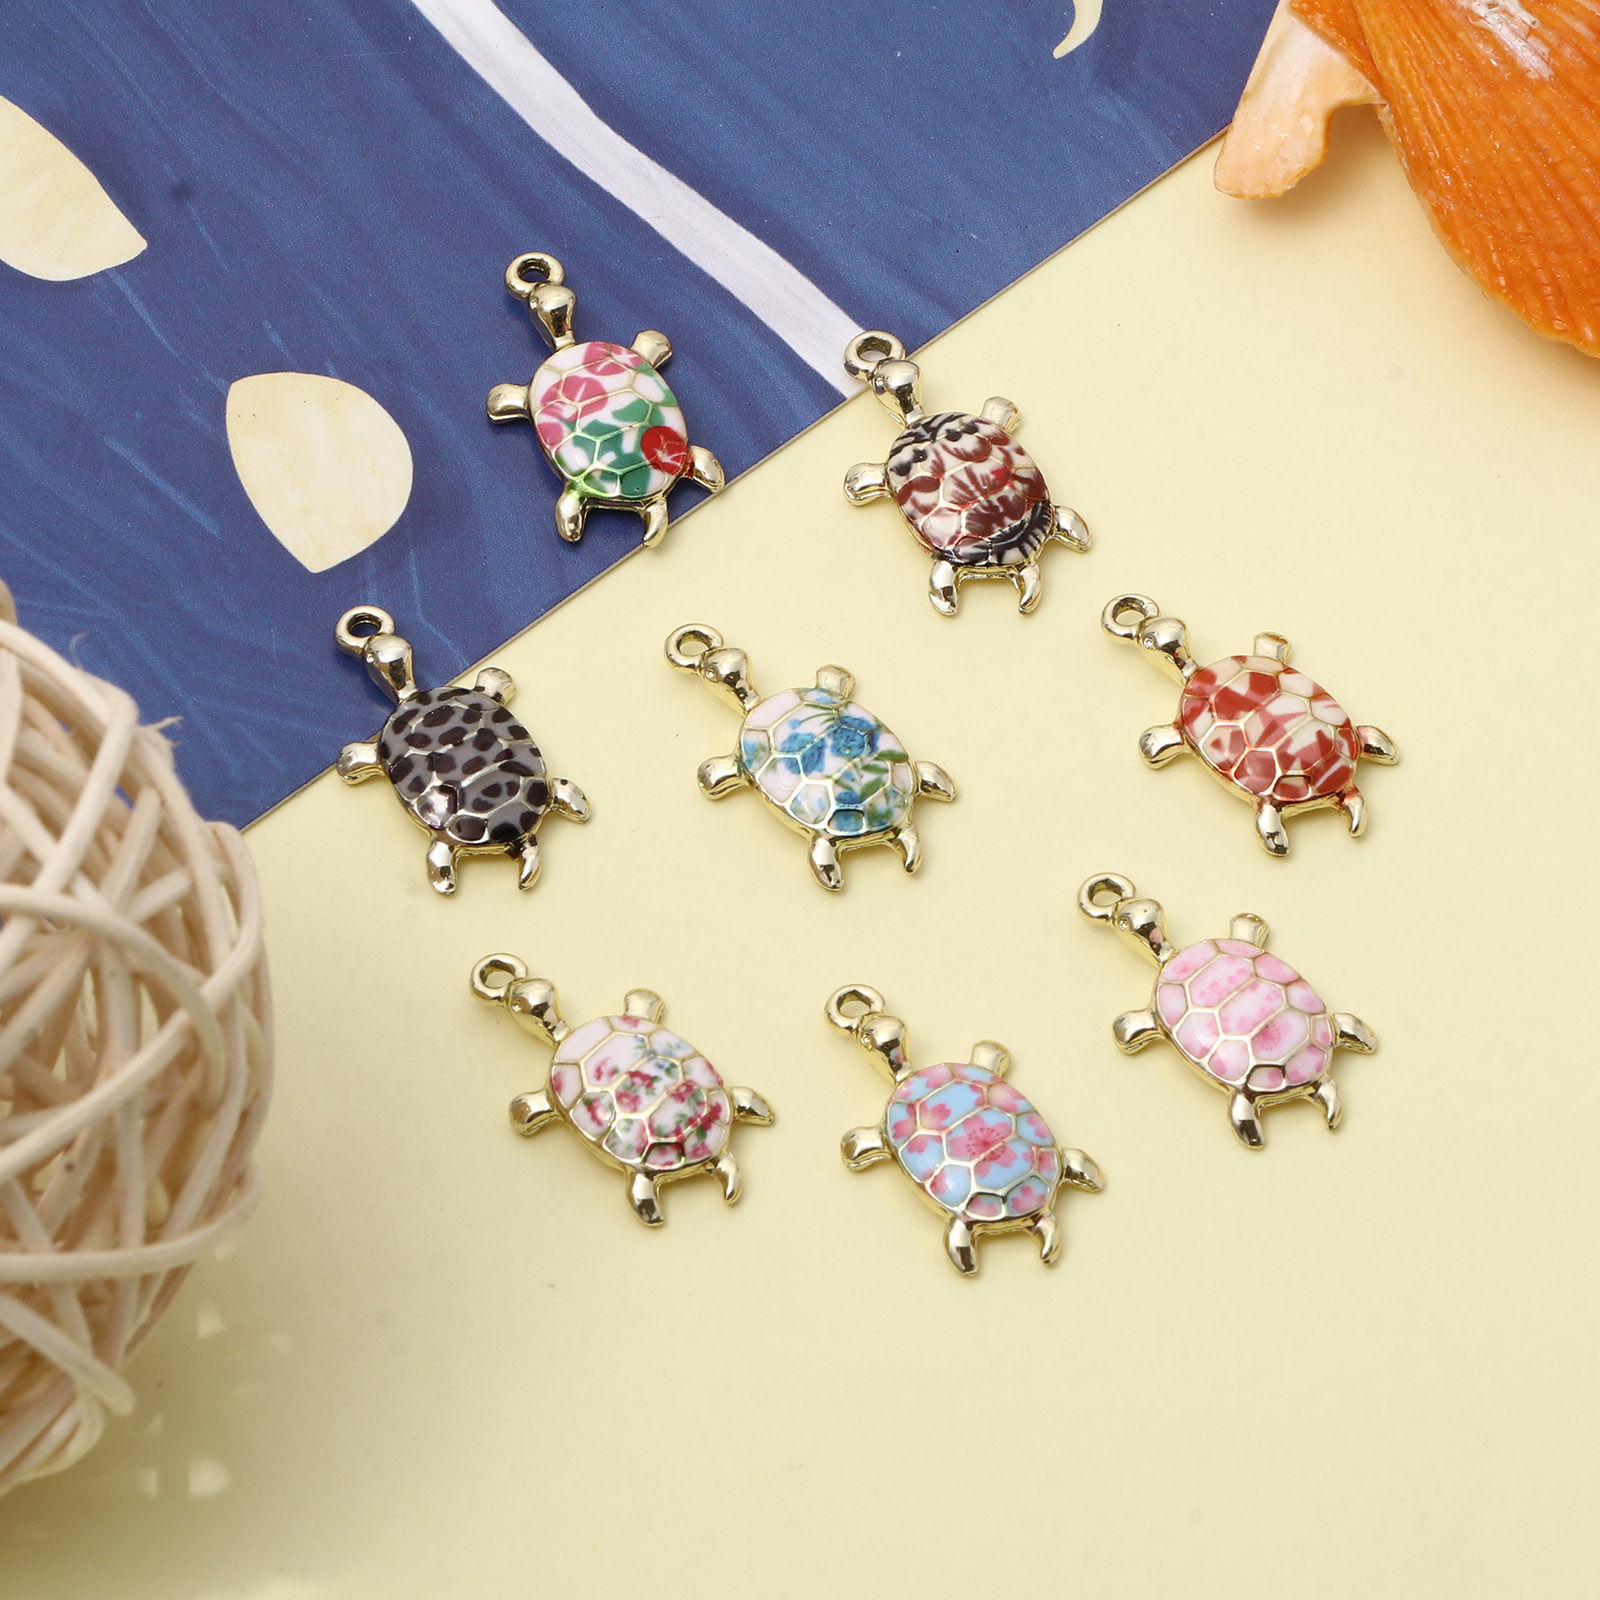 Picture of Zinc Based Alloy Ocean Jewelry Charms Gold Plated Multicolor Sea Turtle Animal Enamel 24mm x 14mm